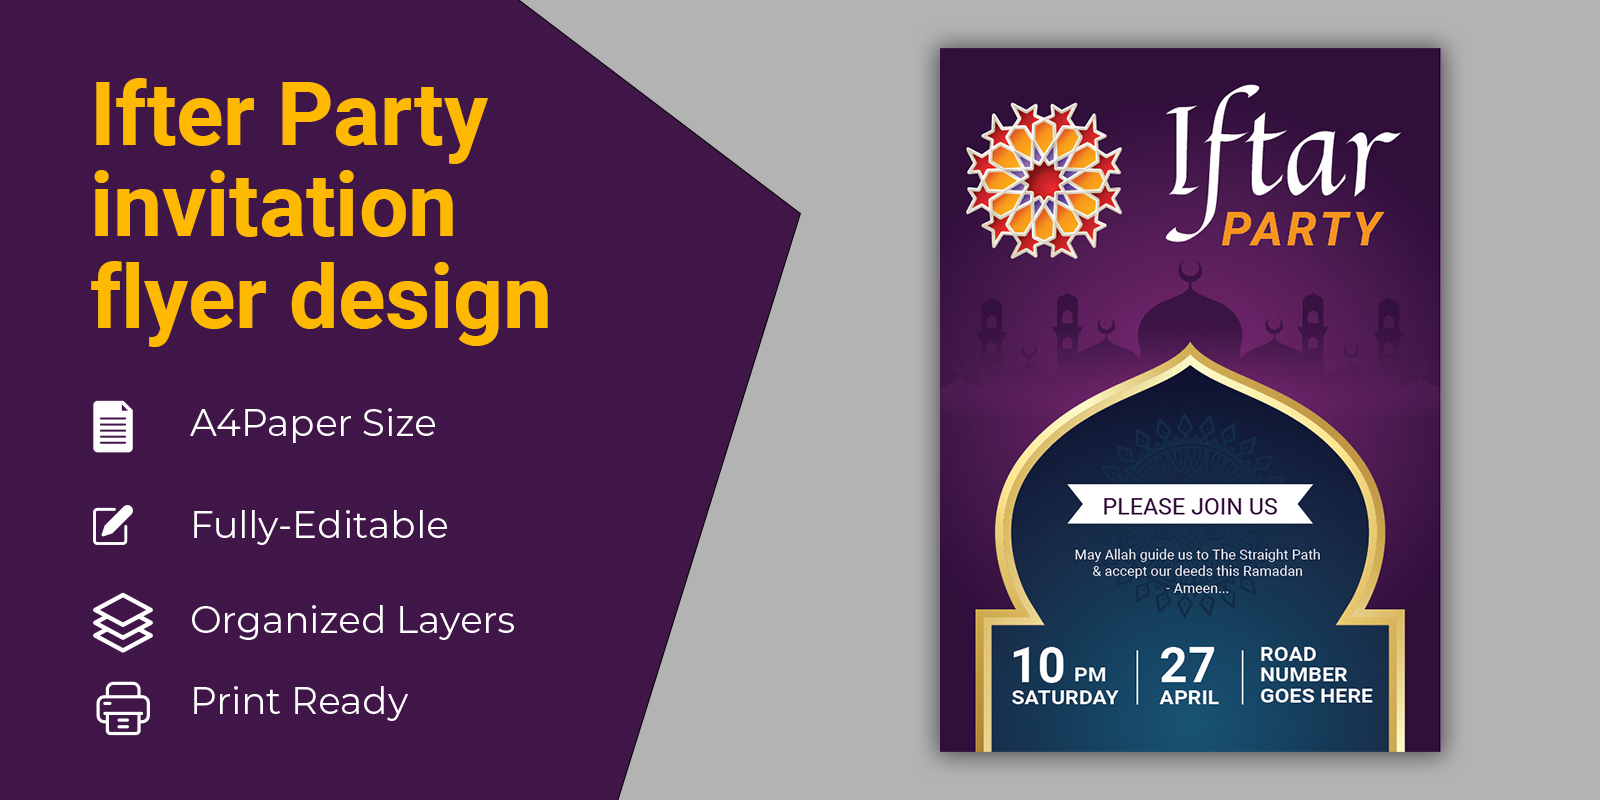 Ifter Party and Seminar Invitation Flyer - Corporate Identity Template